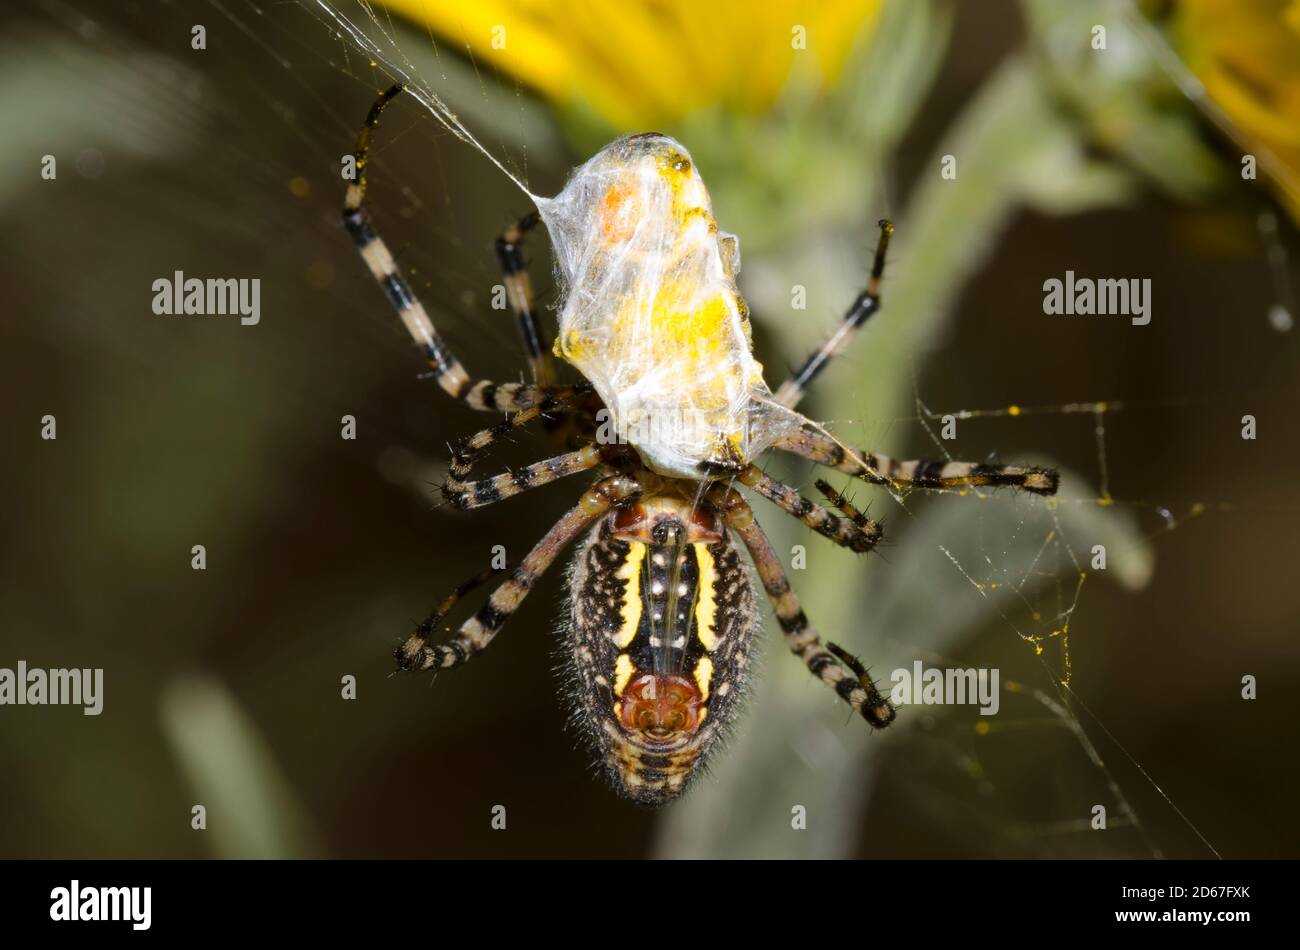 Banded Argiope, Argiope trifasciata, wrapping Honey Bee, Apis mellifera, prey in a patch of Maximilian sunflower, Helianthus maximiliani Stock Photo